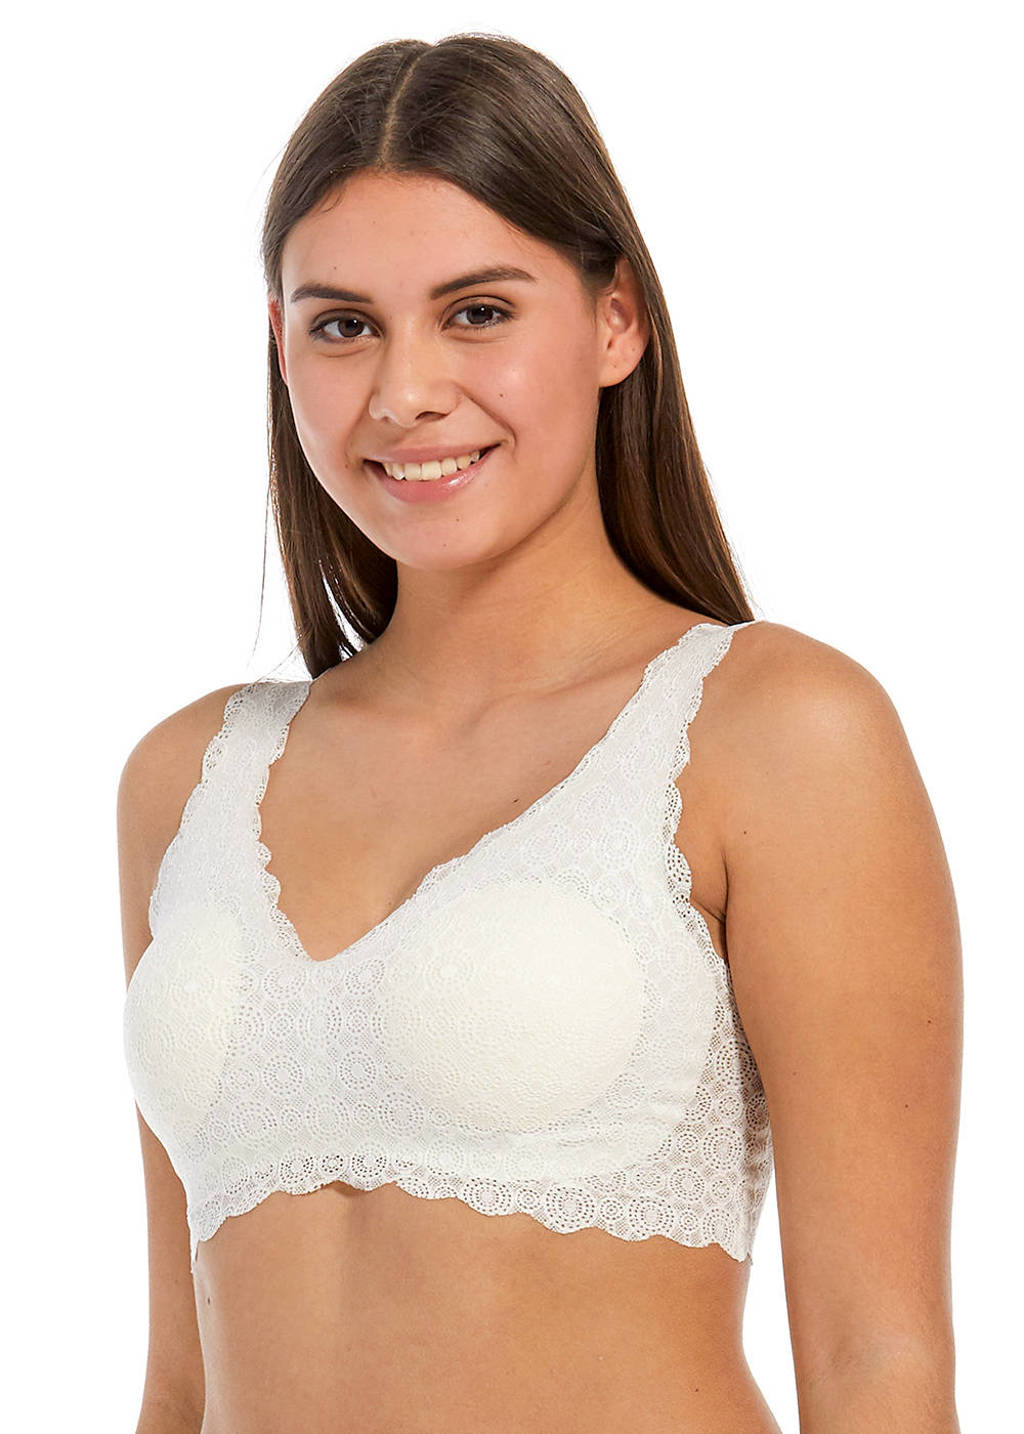 MAGIC Bodyfashion bh zonder beugel Dream Lace met kant wit, Wit